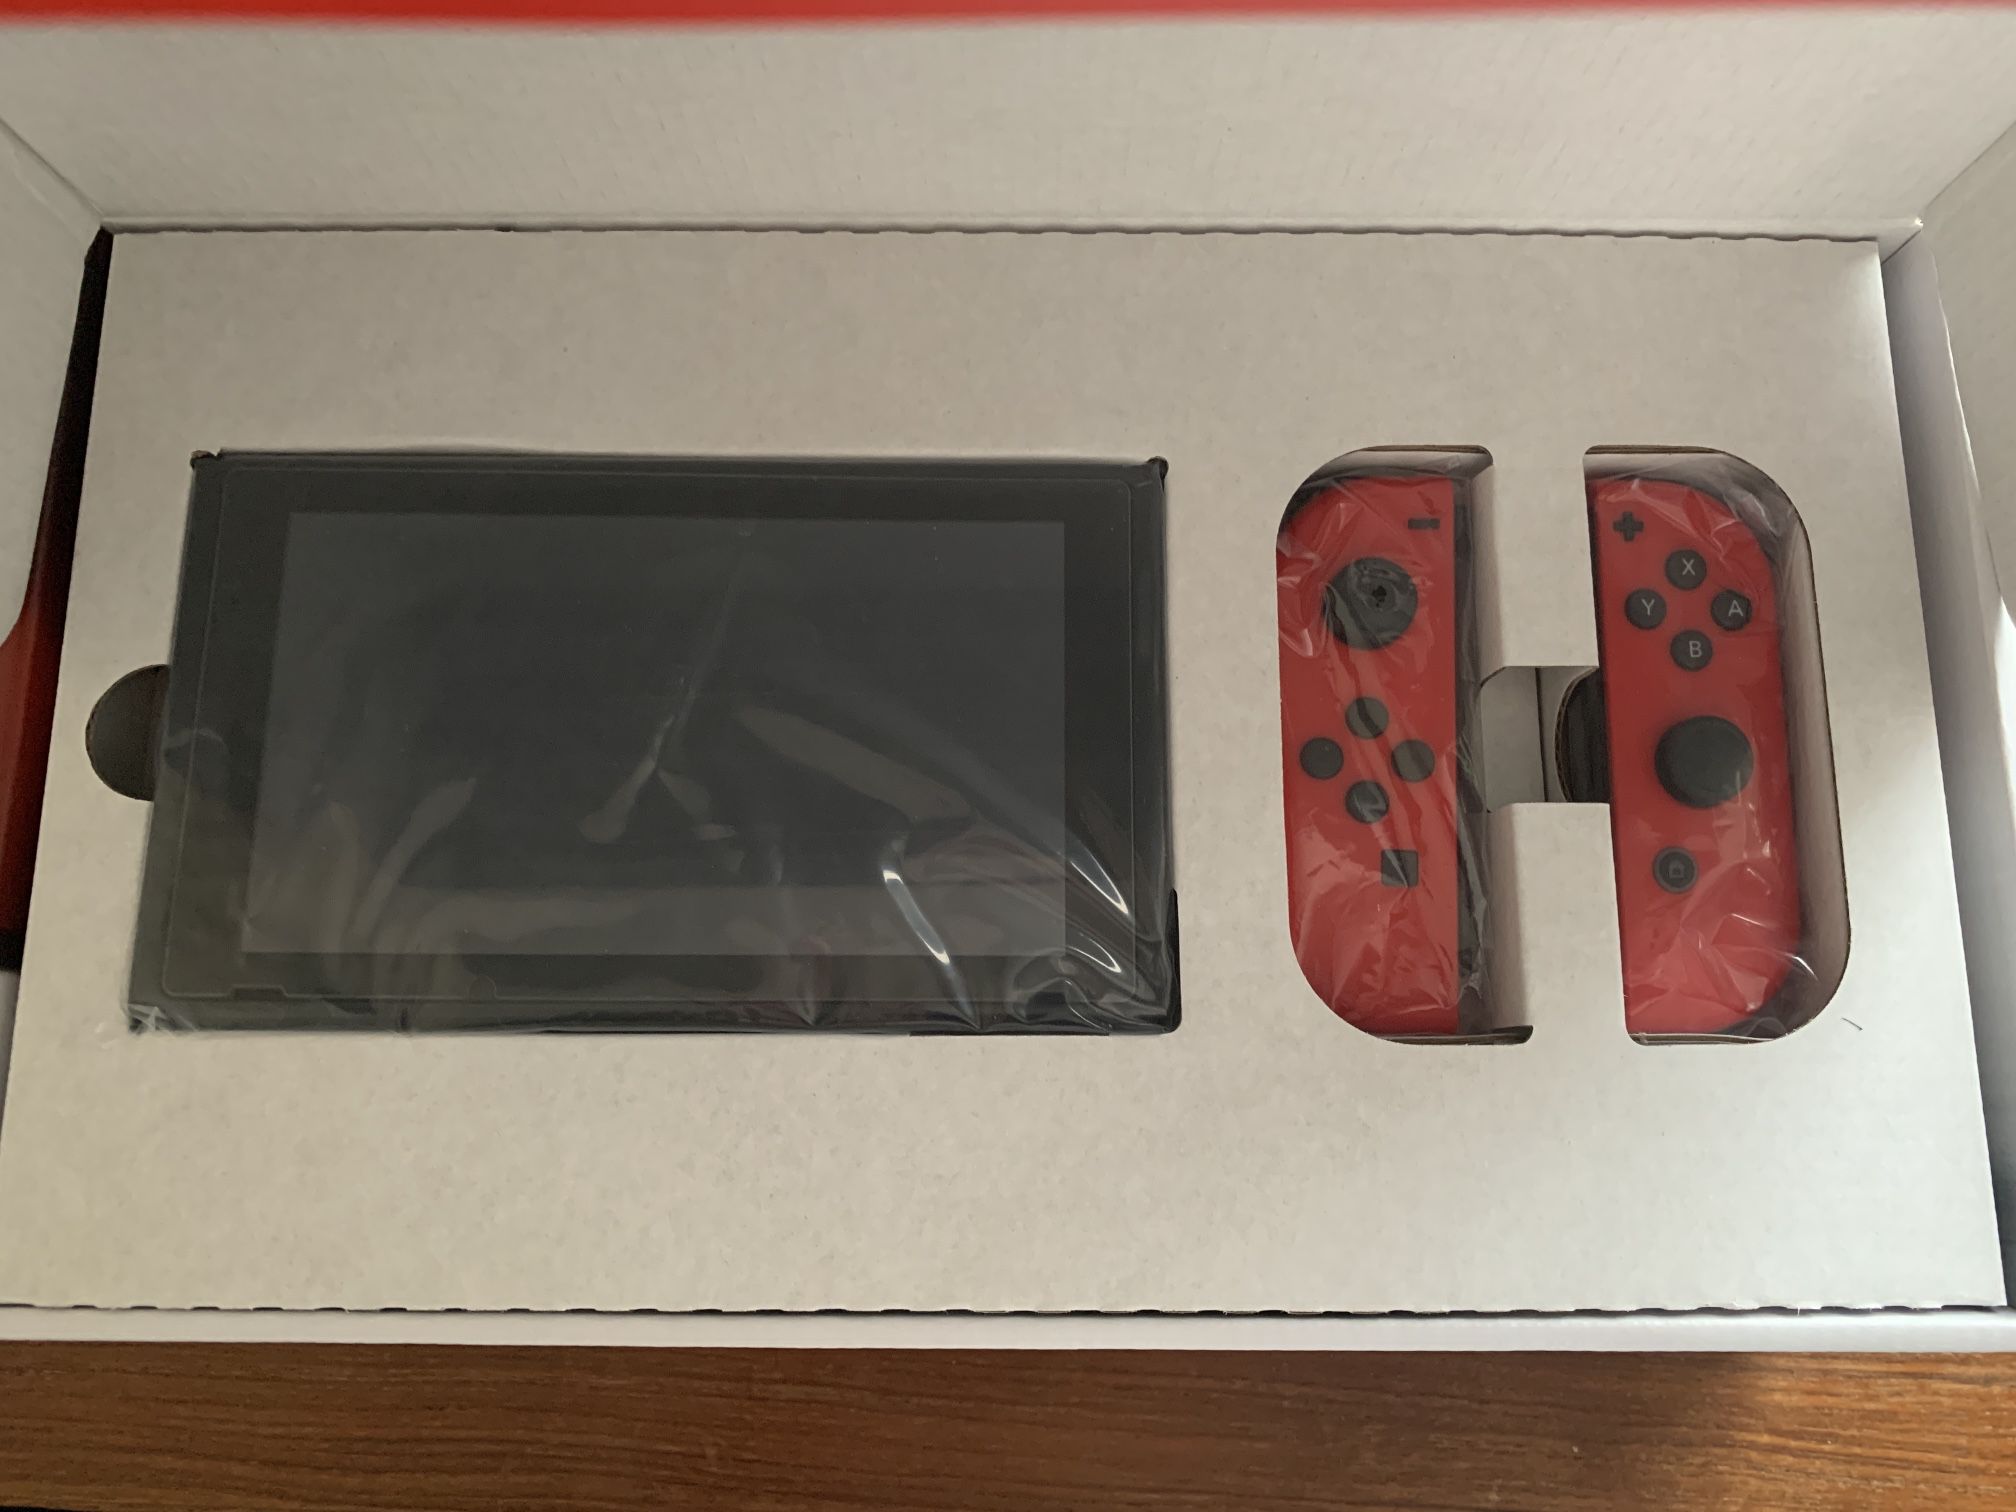 Nintendo Switch V2 with Mario Red Joy-Cons